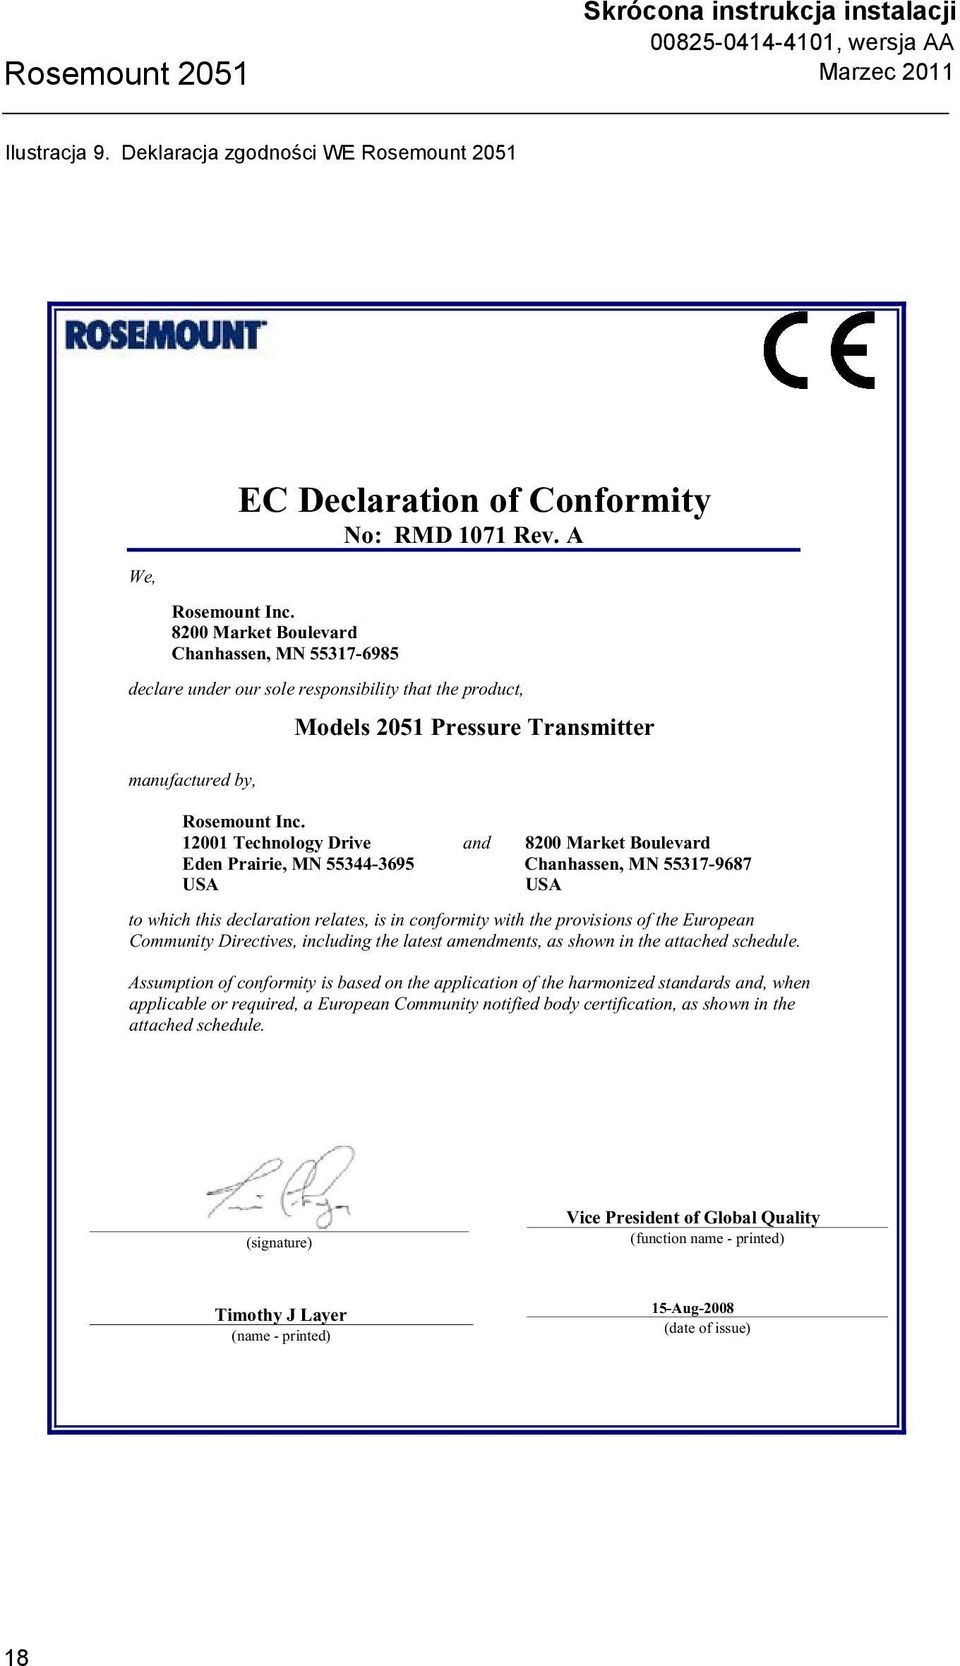 12001 Technology Drive and 8200 Market Boulevard Eden Prairie, MN 55344-3695 Chanhassen, MN 55317-9687 USA USA to which this declaration relates, is in conformity with the provisions of the European